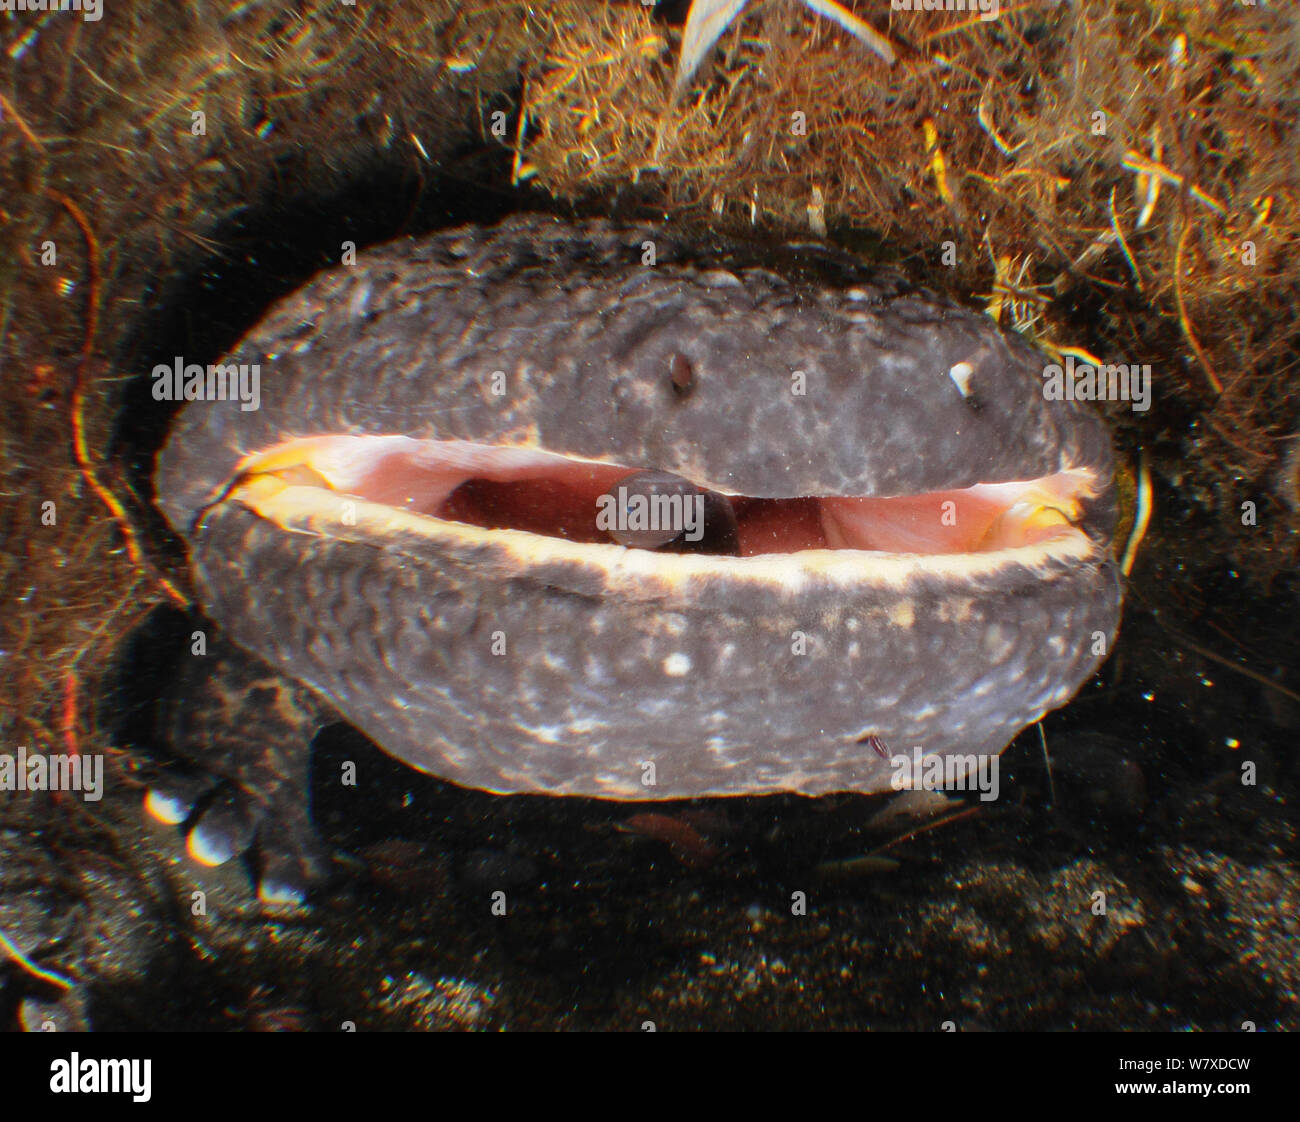 Japanese giant salamander (Andrias japonicus) male with own young in mouth. Hino river, Nichinan-chou, Tottori, Japan, March. Stock Photo